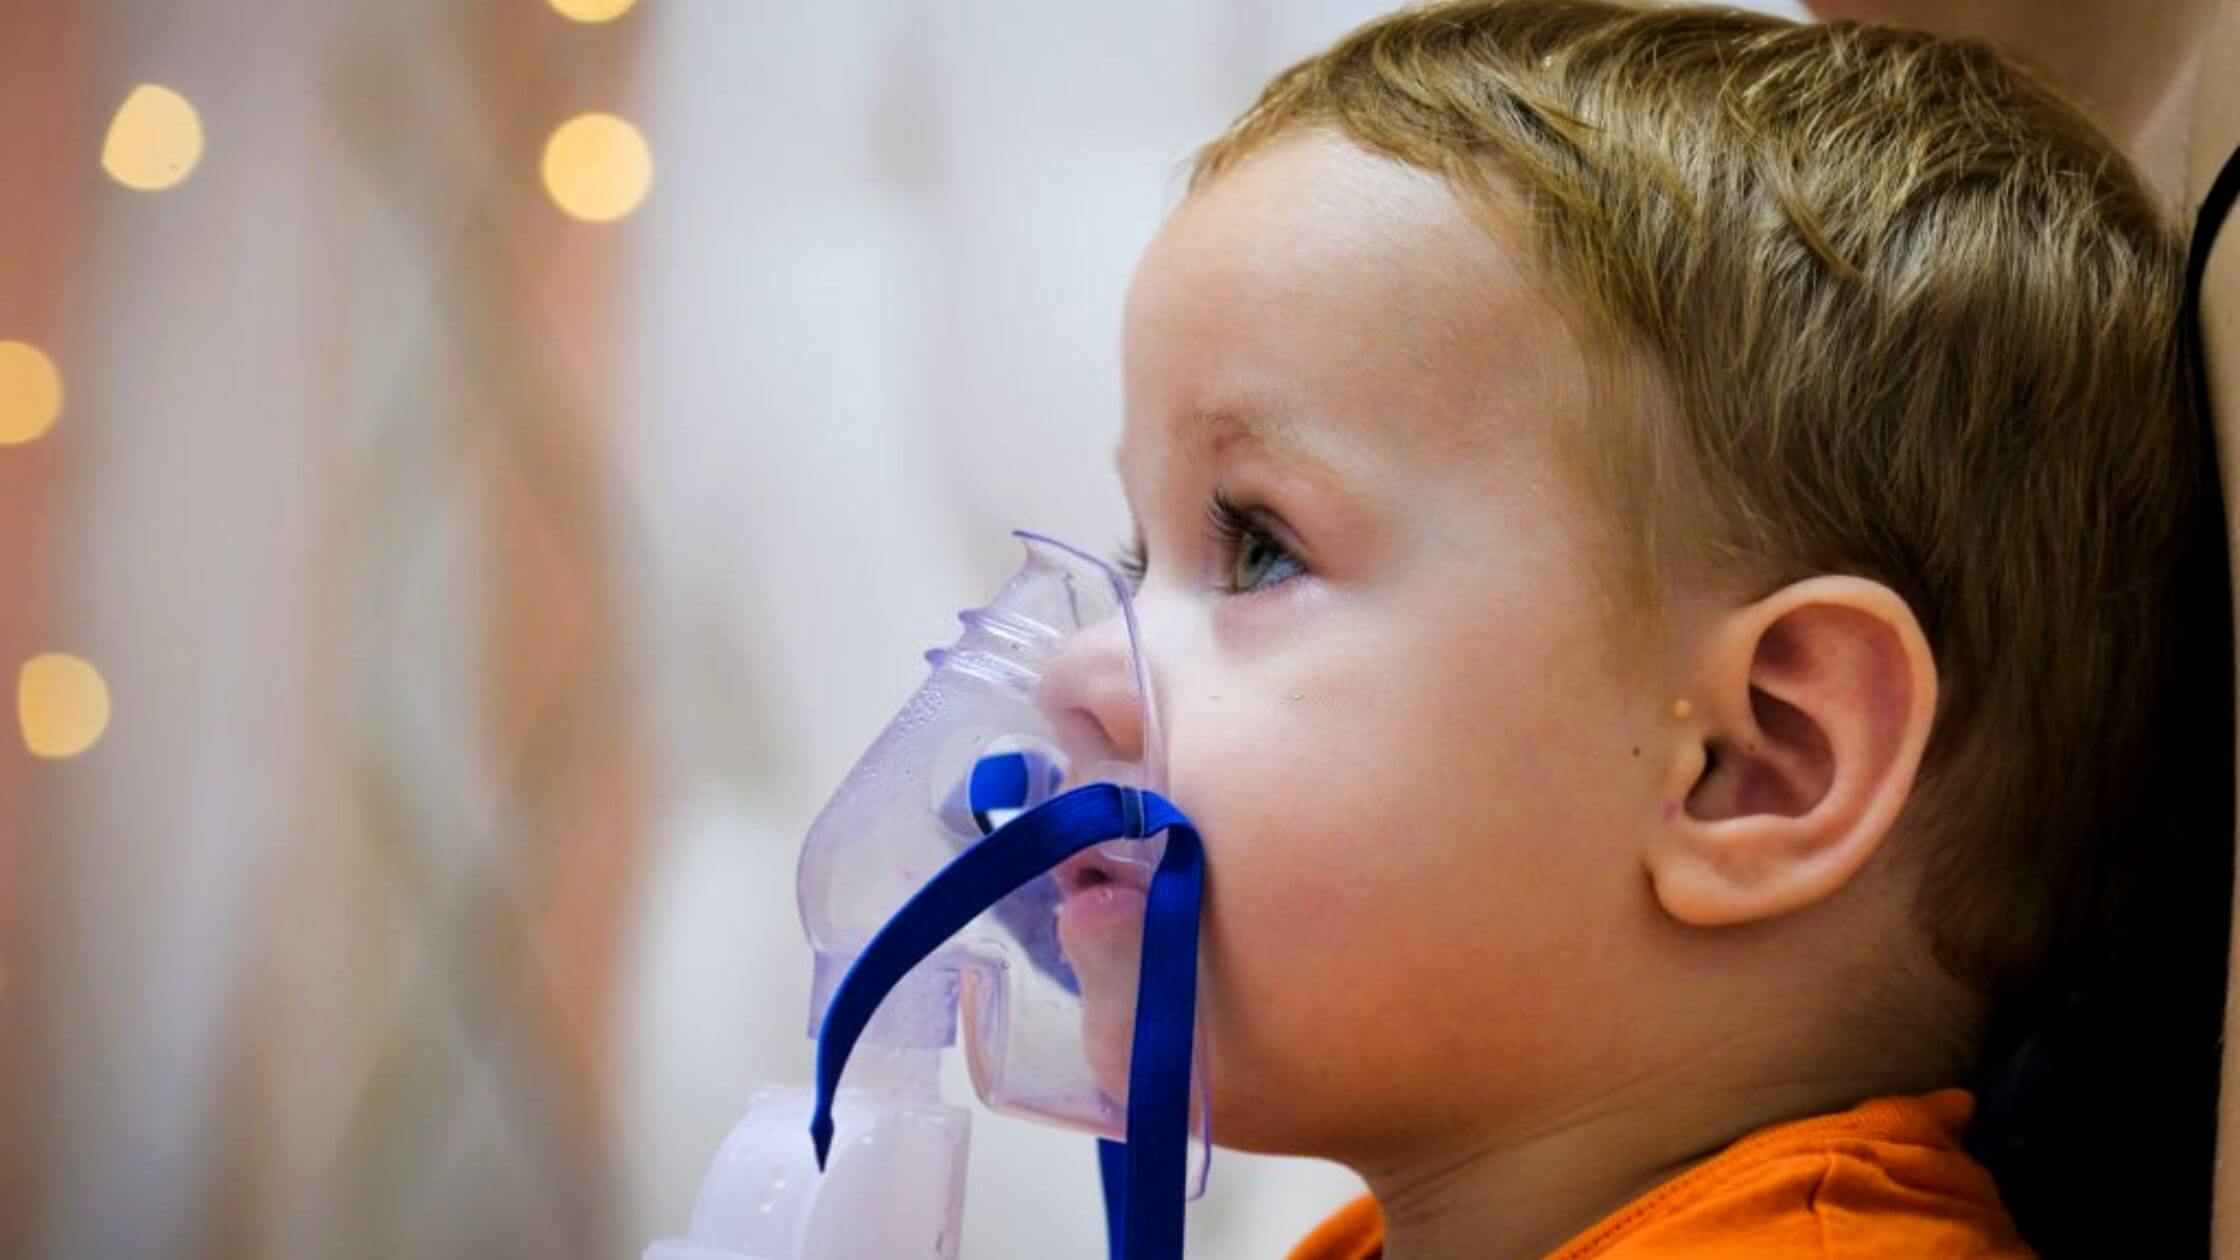 A Spike In RSV Cases Among Children Is Being Watched By Local Health Officials